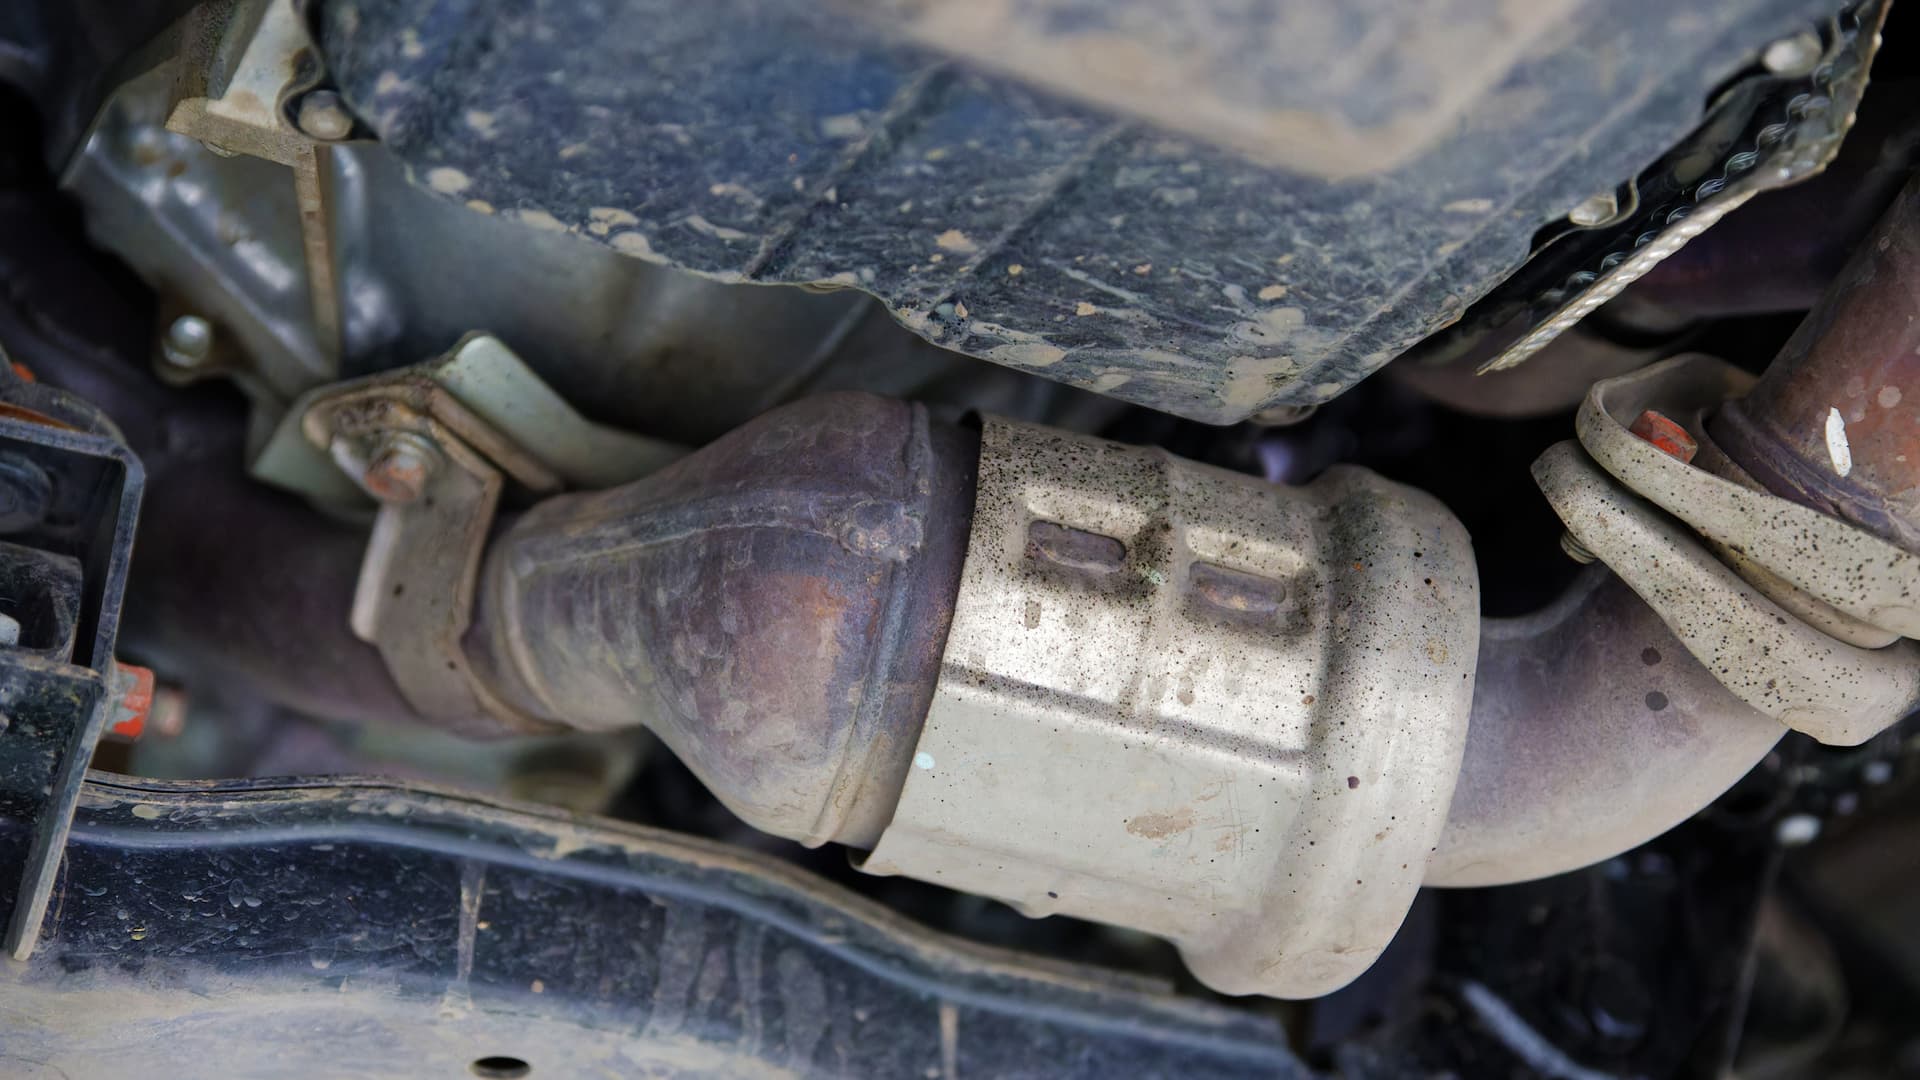 How Long Can I Drive With Bad Catalytic Converter